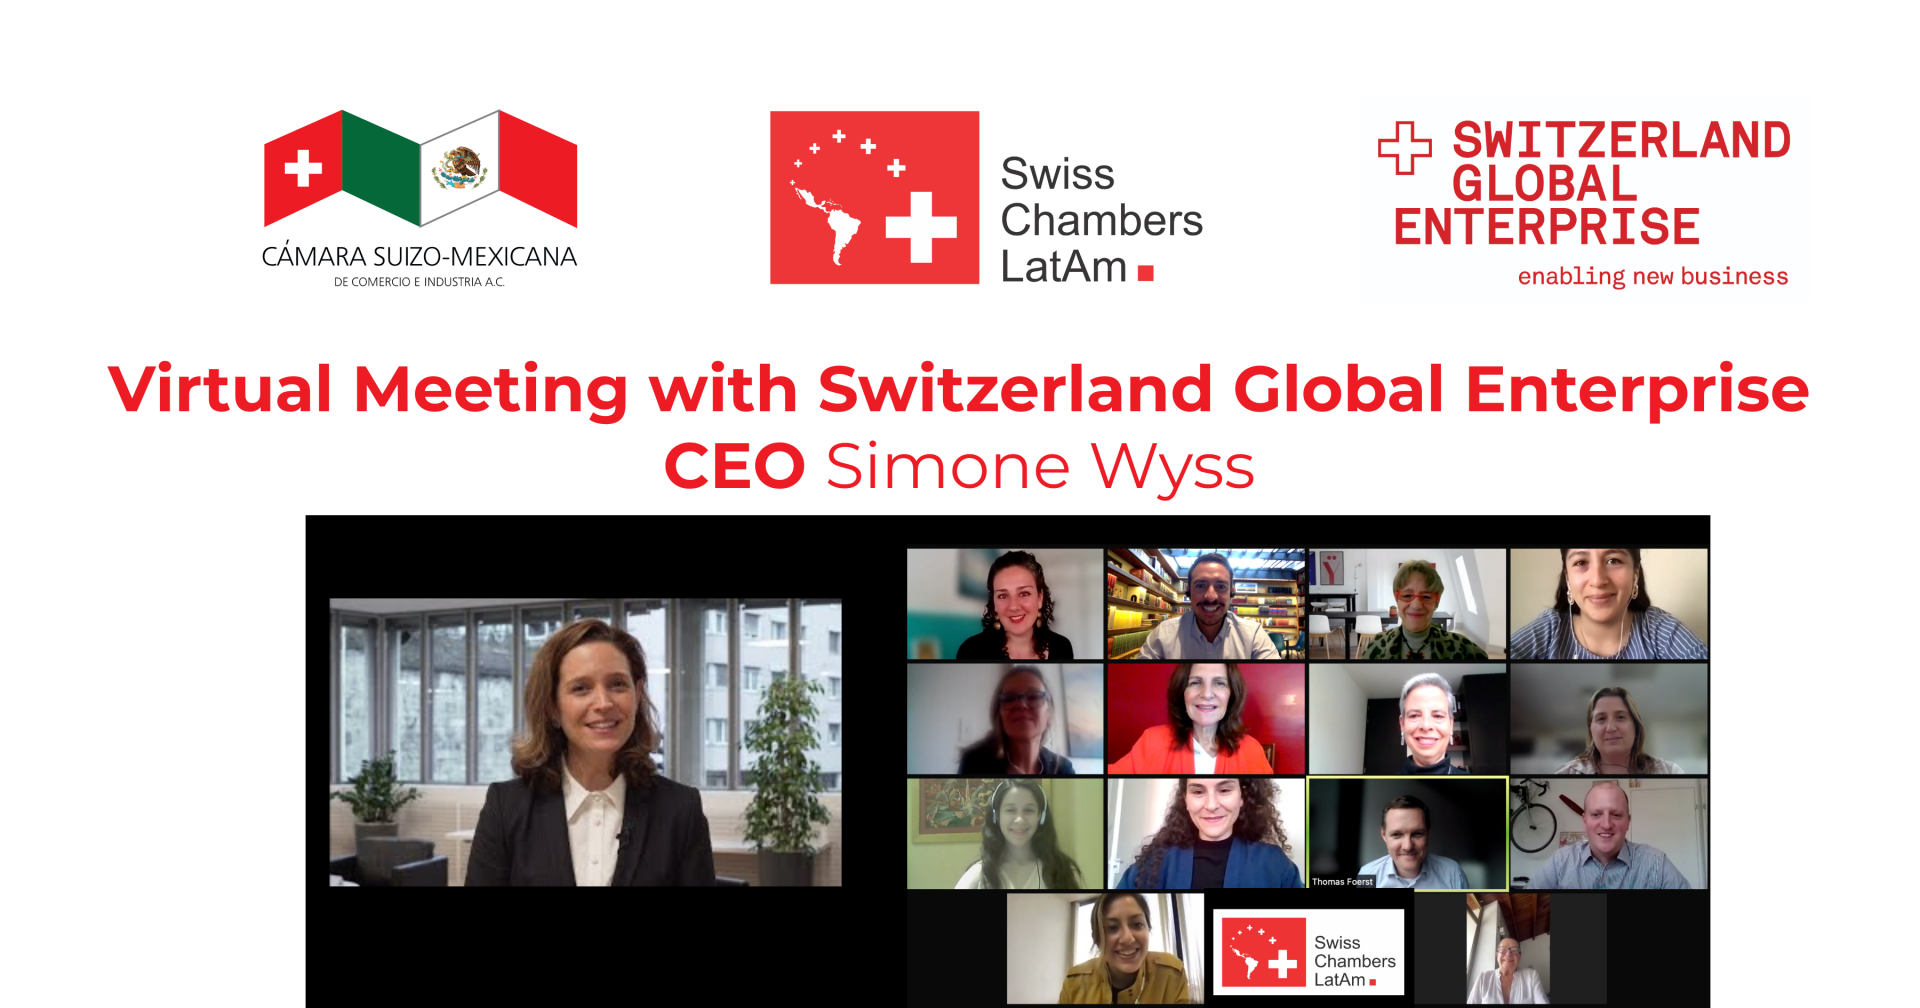 Meeting with CEO of Switzerland Global Enterprise